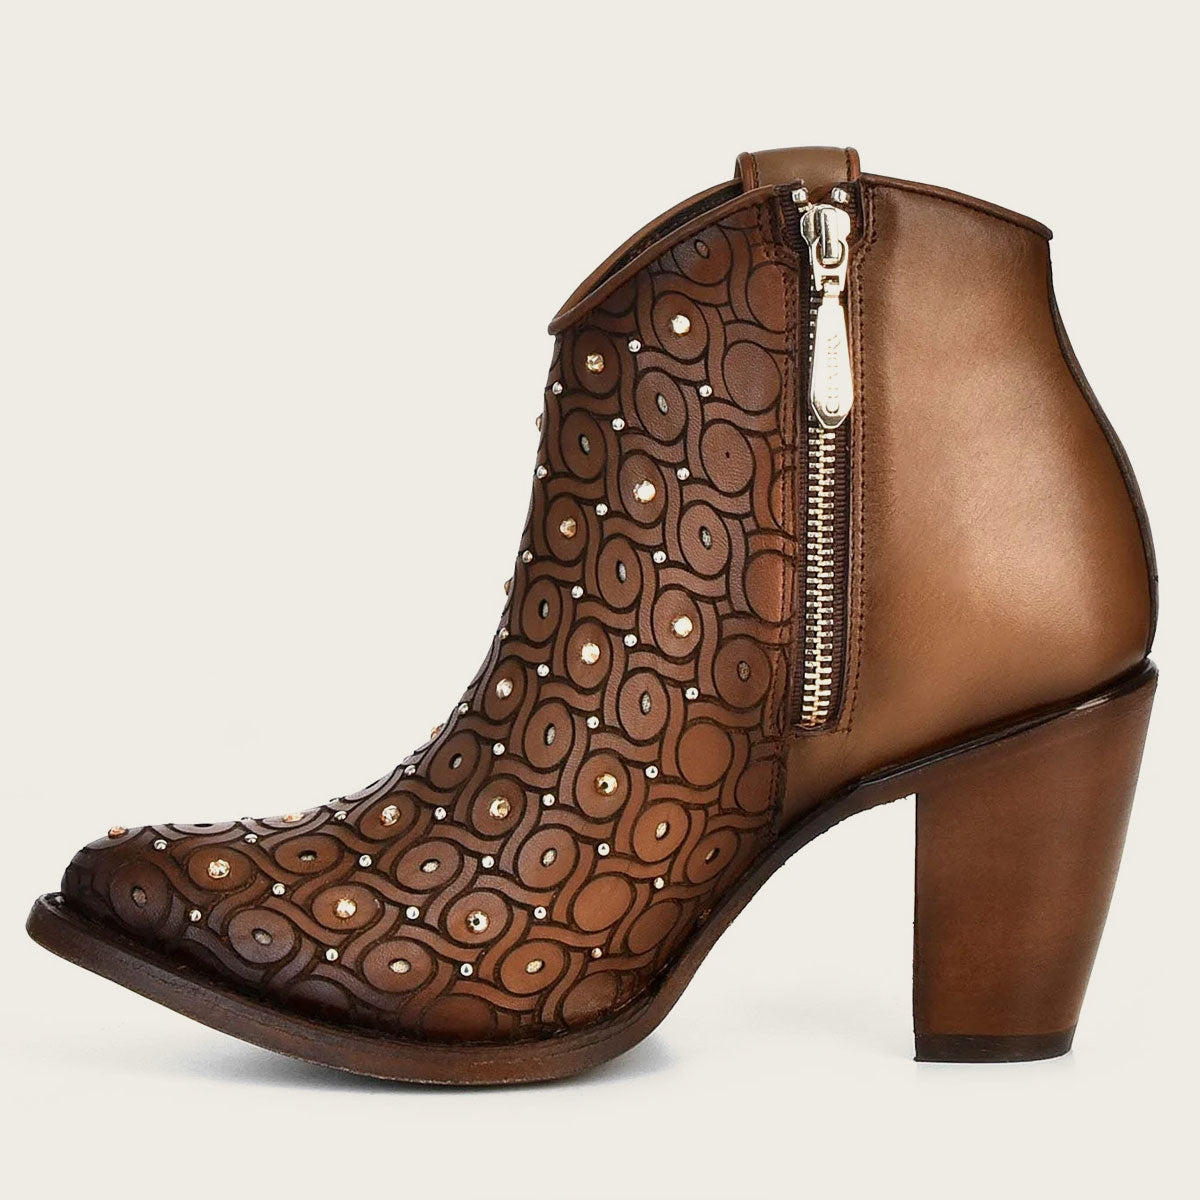 Image of brown handwoven leather bootie with Austrian crystals - luxury and sophistication at its finest.